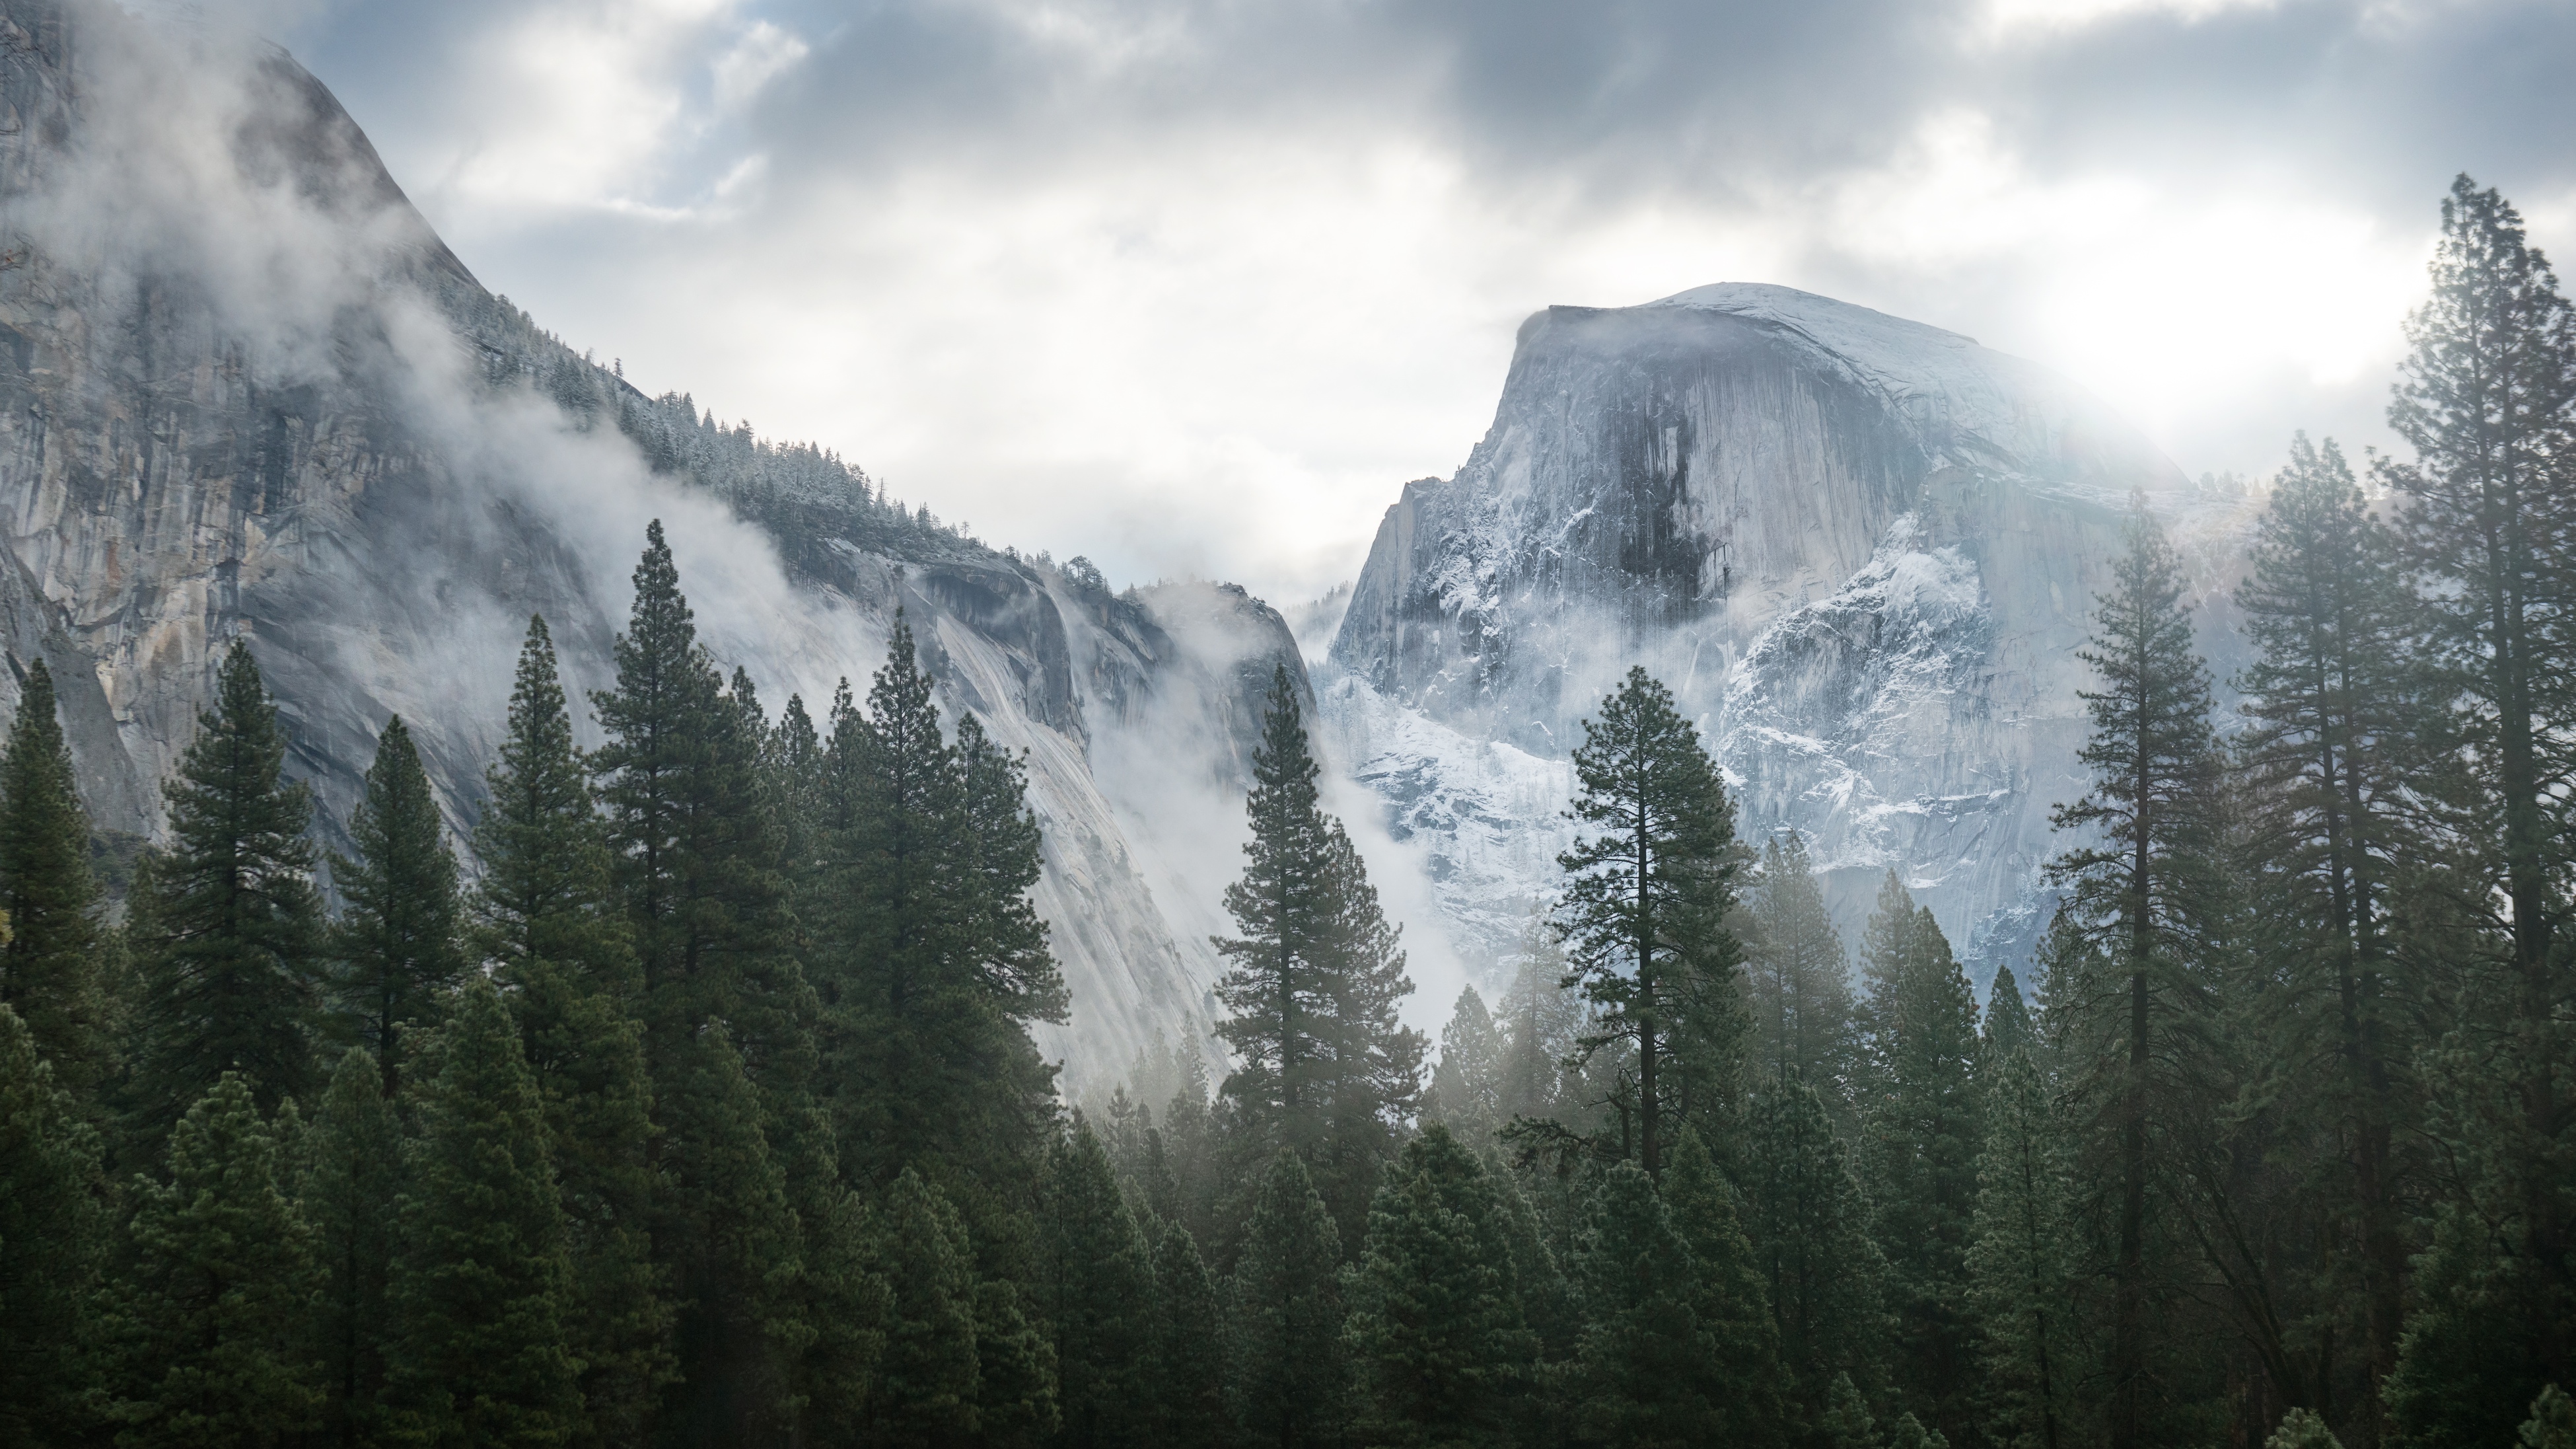 Free download wallpapers Yosemite pour Mac OS X et iPad [3900x2193] for your Desktop, Mobile & Tablet